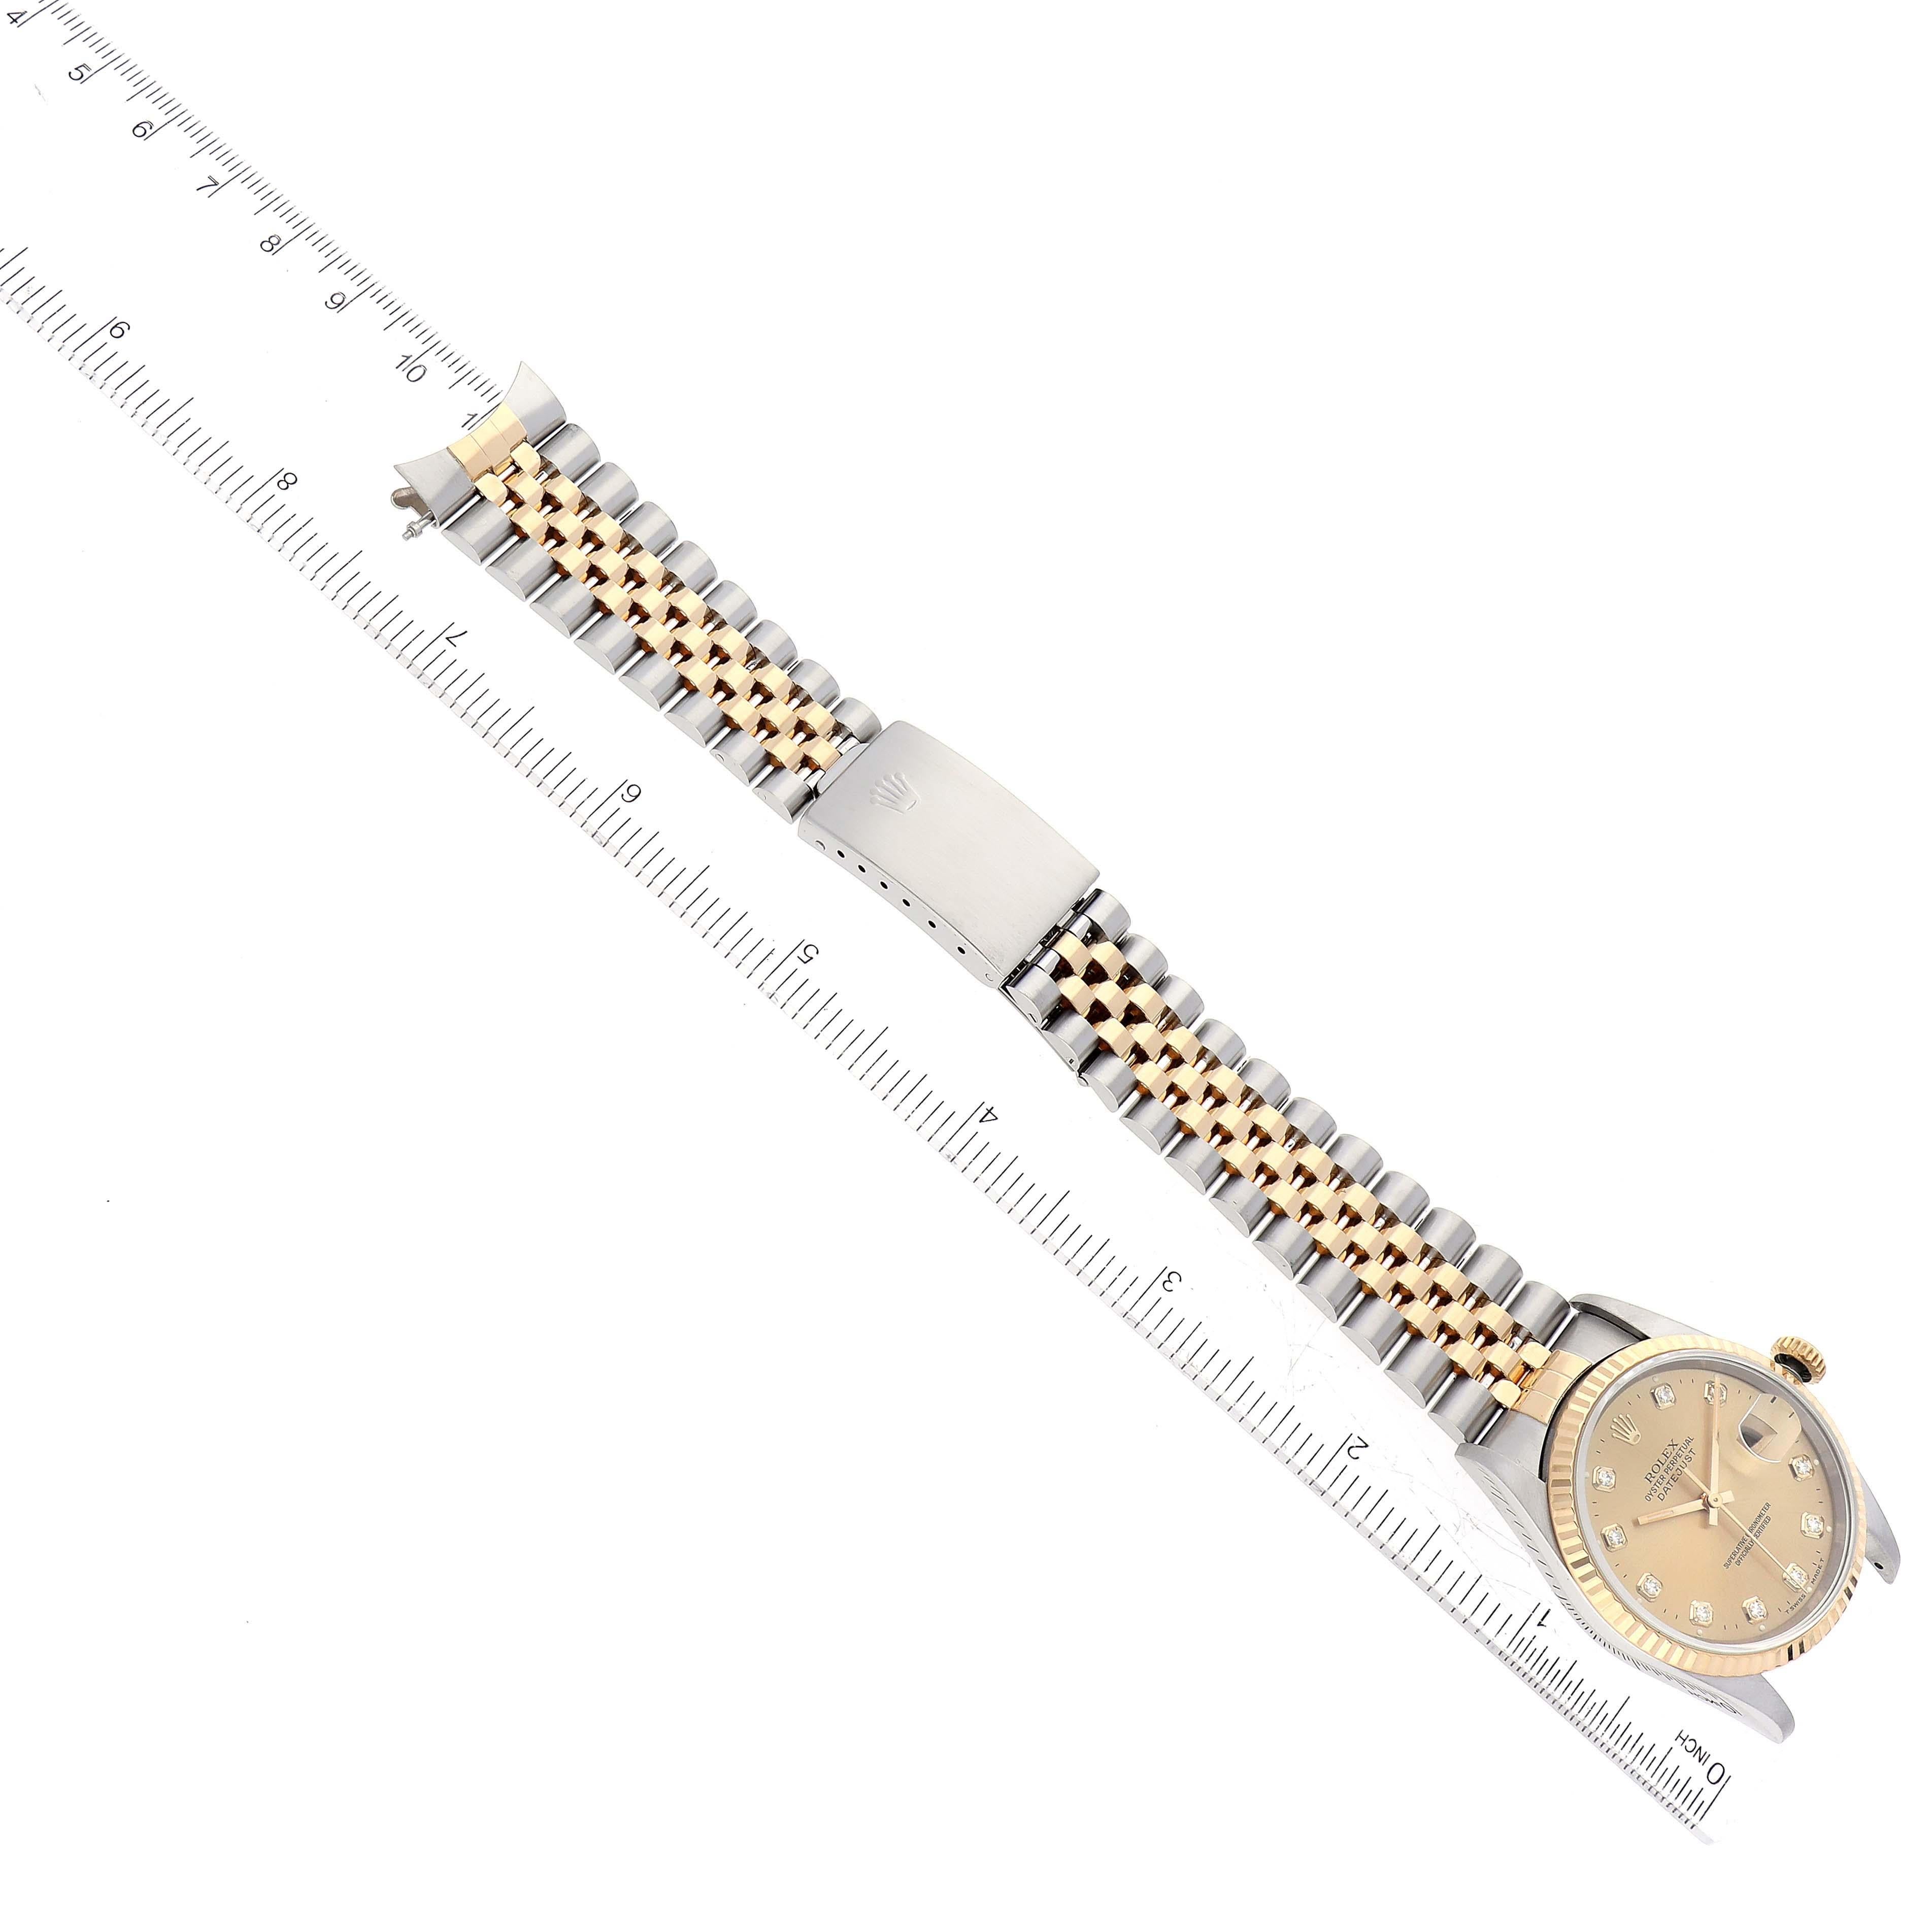 Rolex Datejust Champagne Diamond Dial Steel Yellow Gold Mens Watch 16233 5